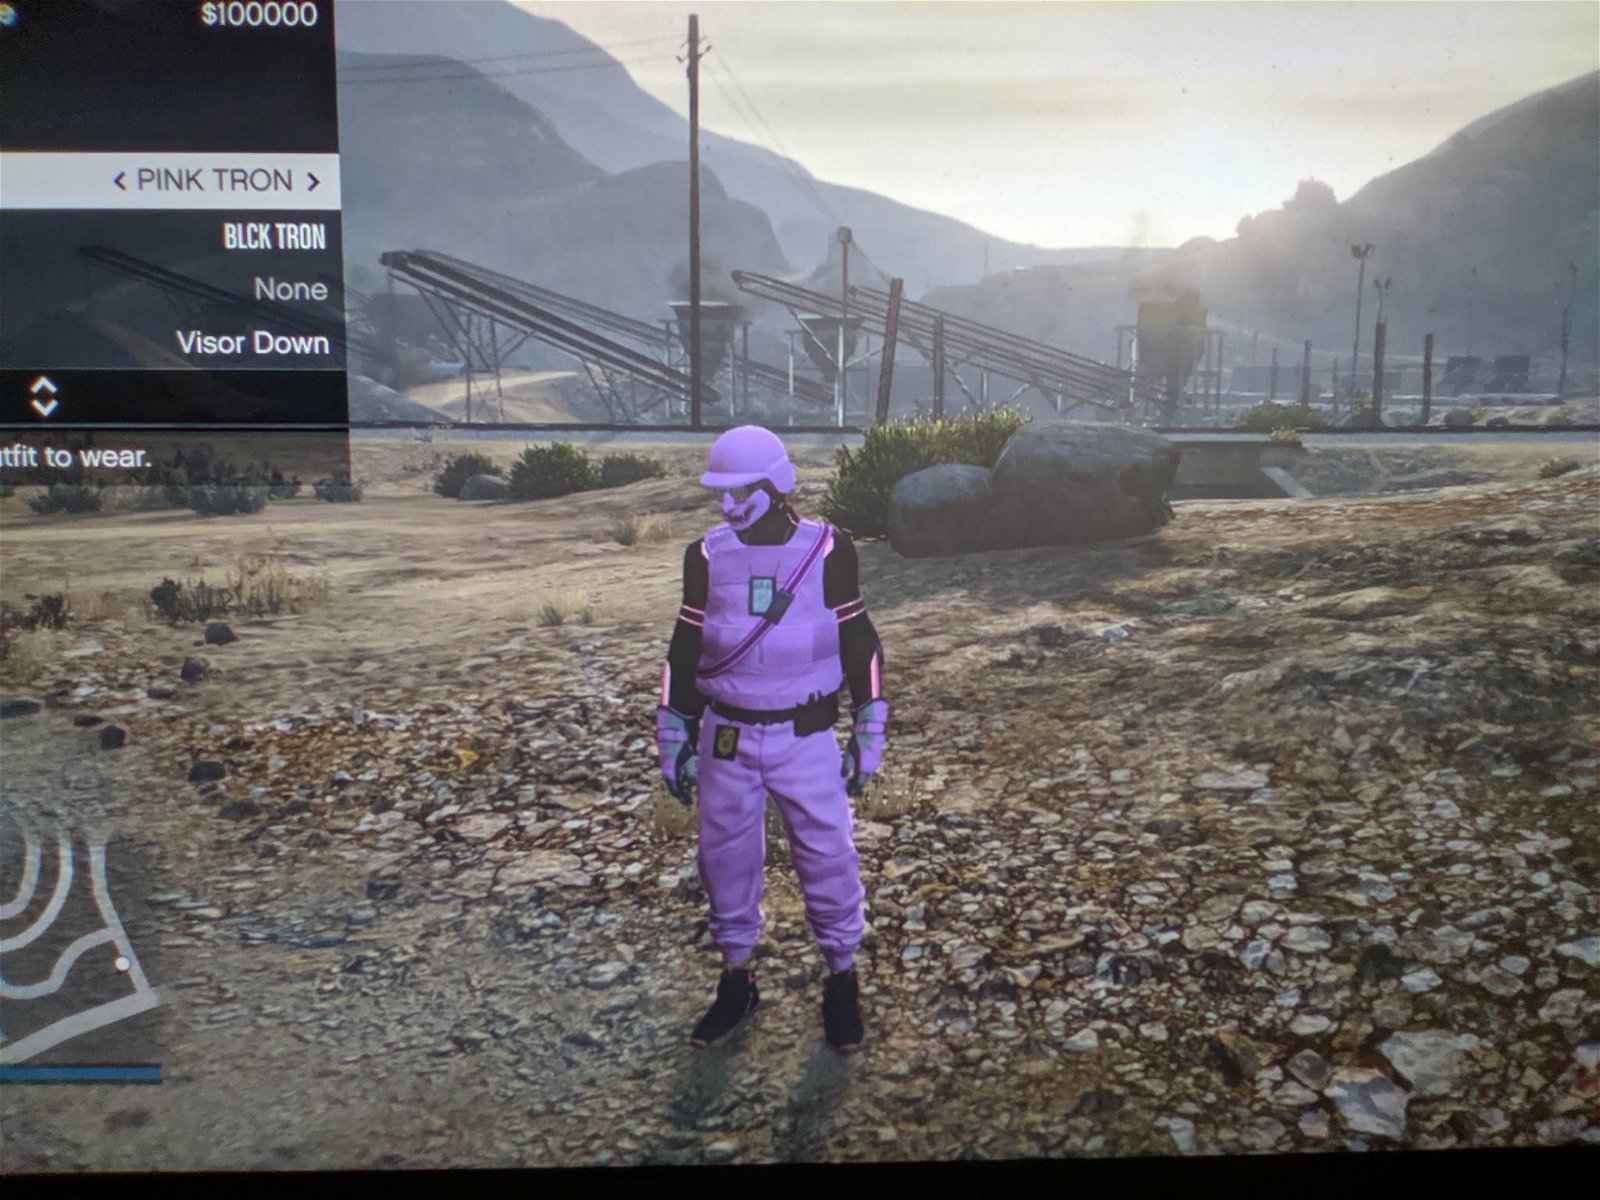 Gta 5 PS5 Modded account, Video Gaming, Video Games, PlayStation